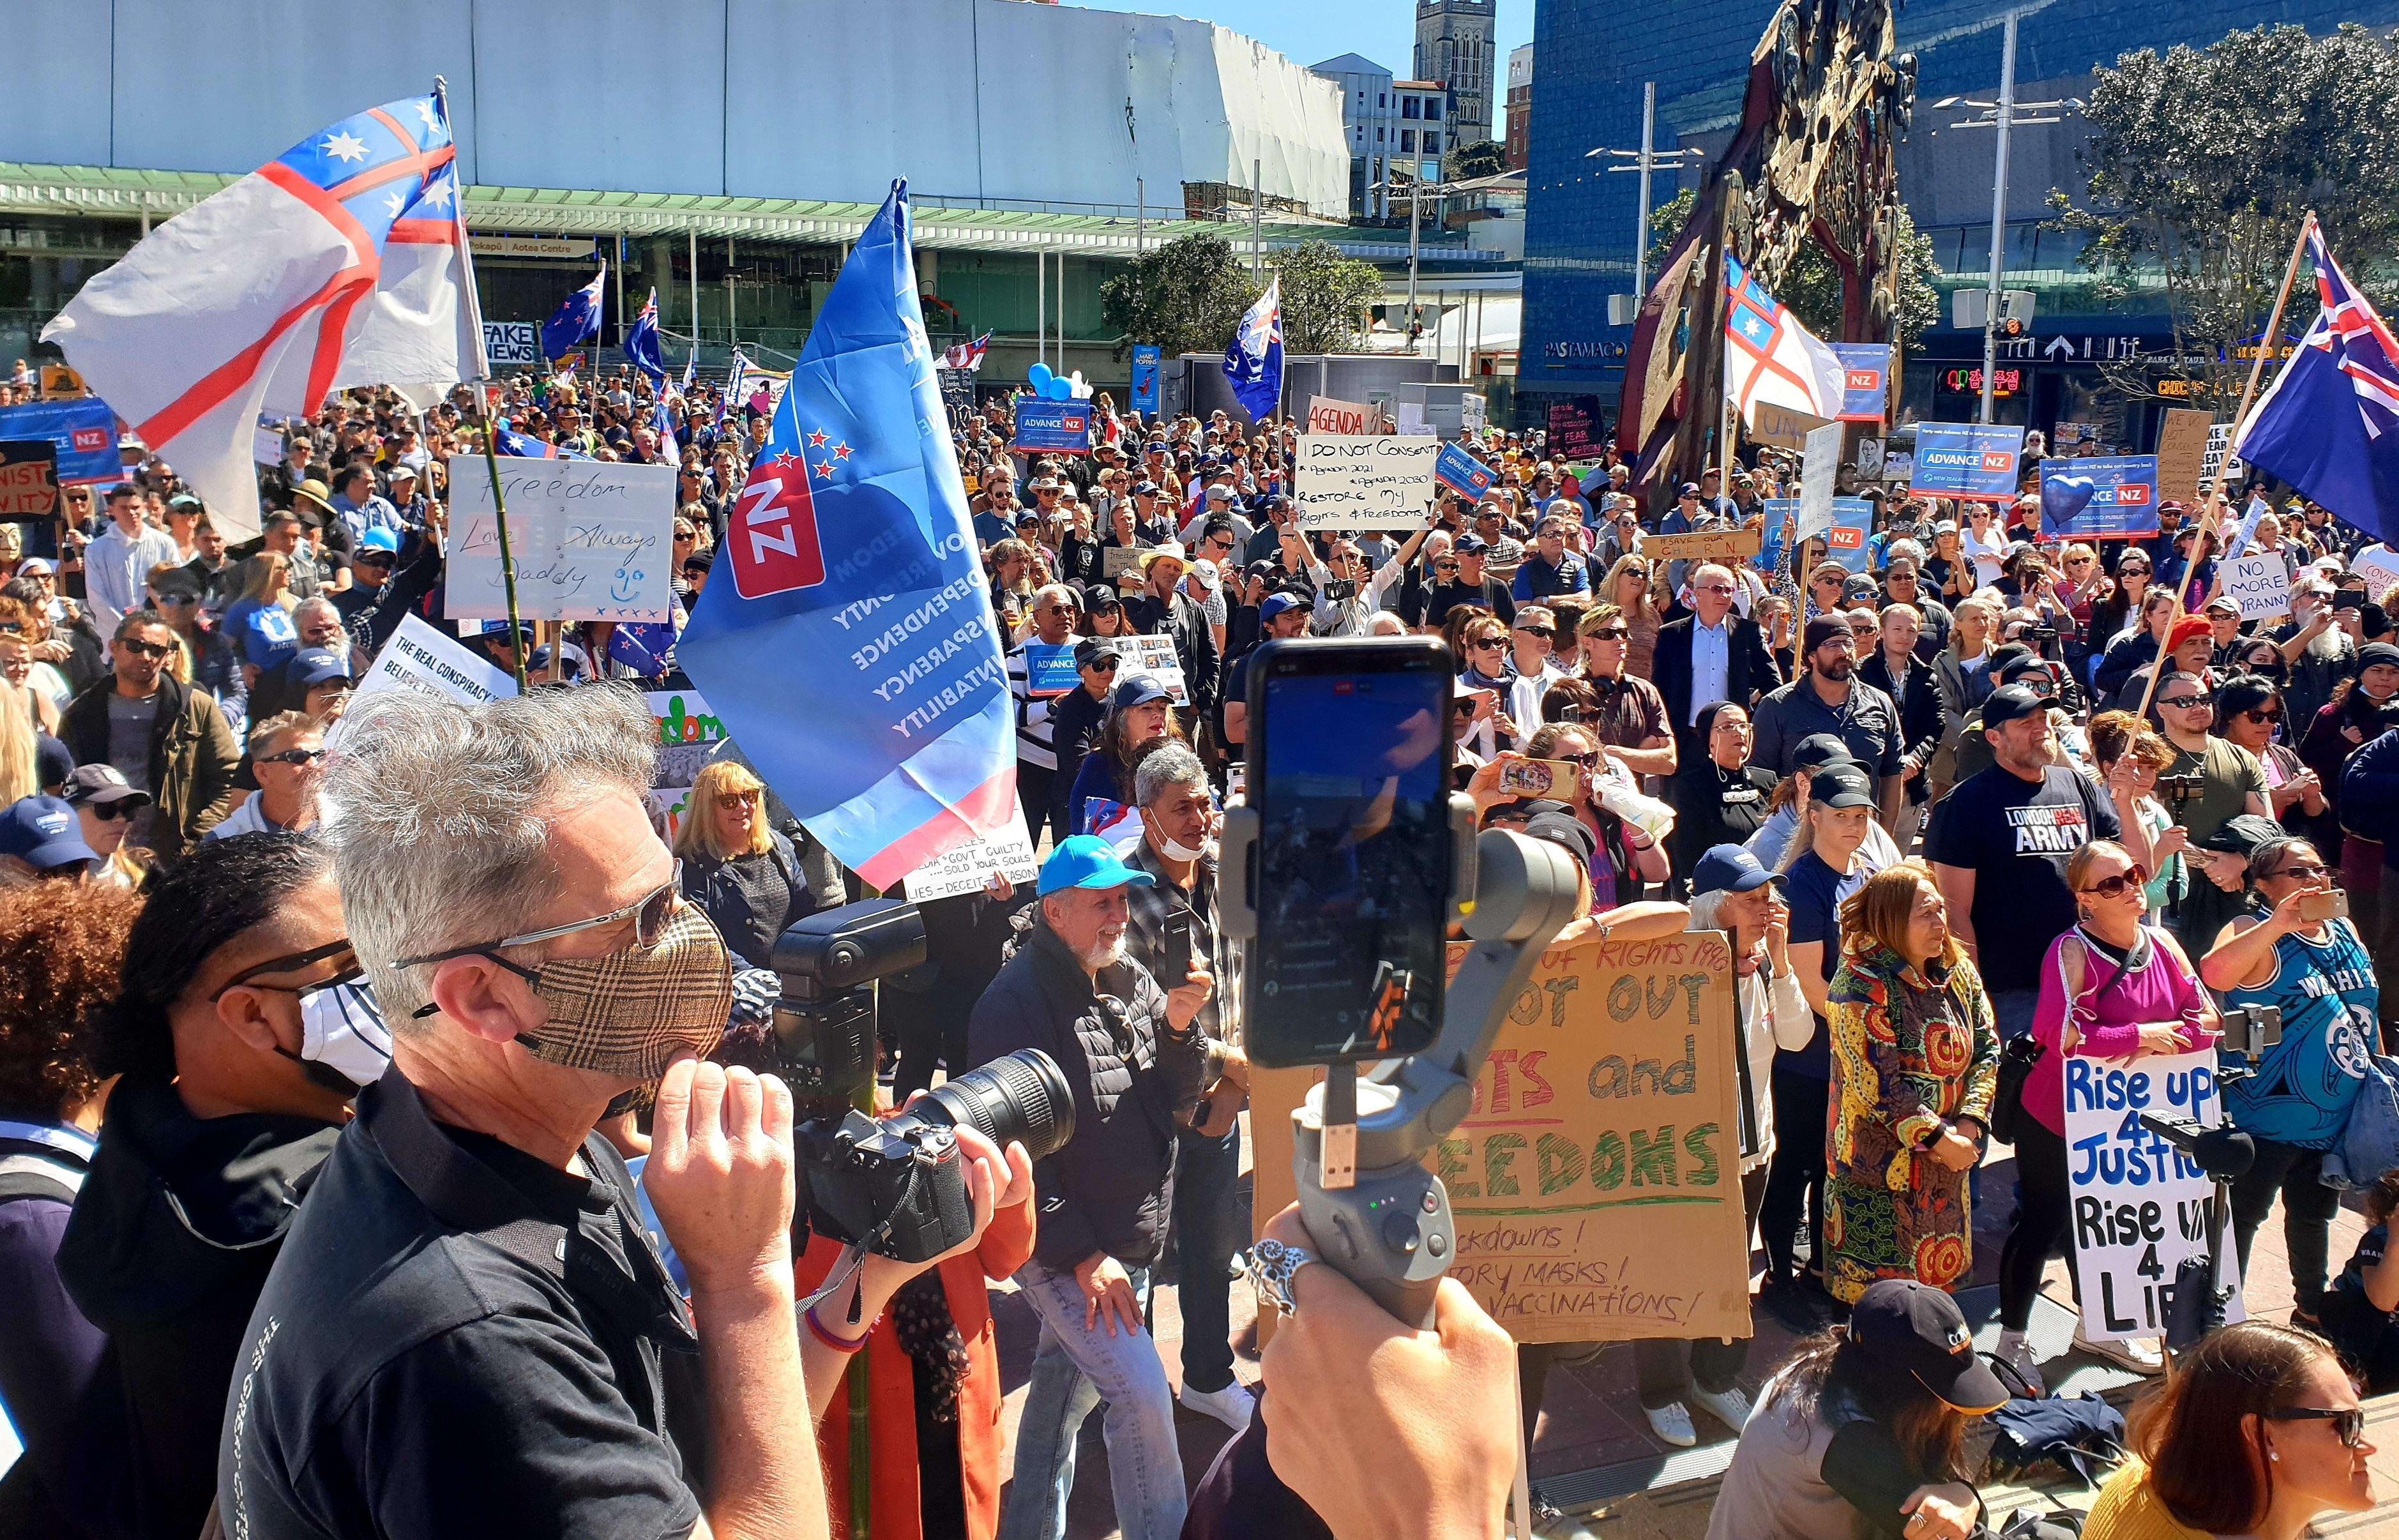 About a few thousand people were out for Advance Party's demonstration against the government's Covid-19 restrictions and lockdowns on 12 September, 2020.